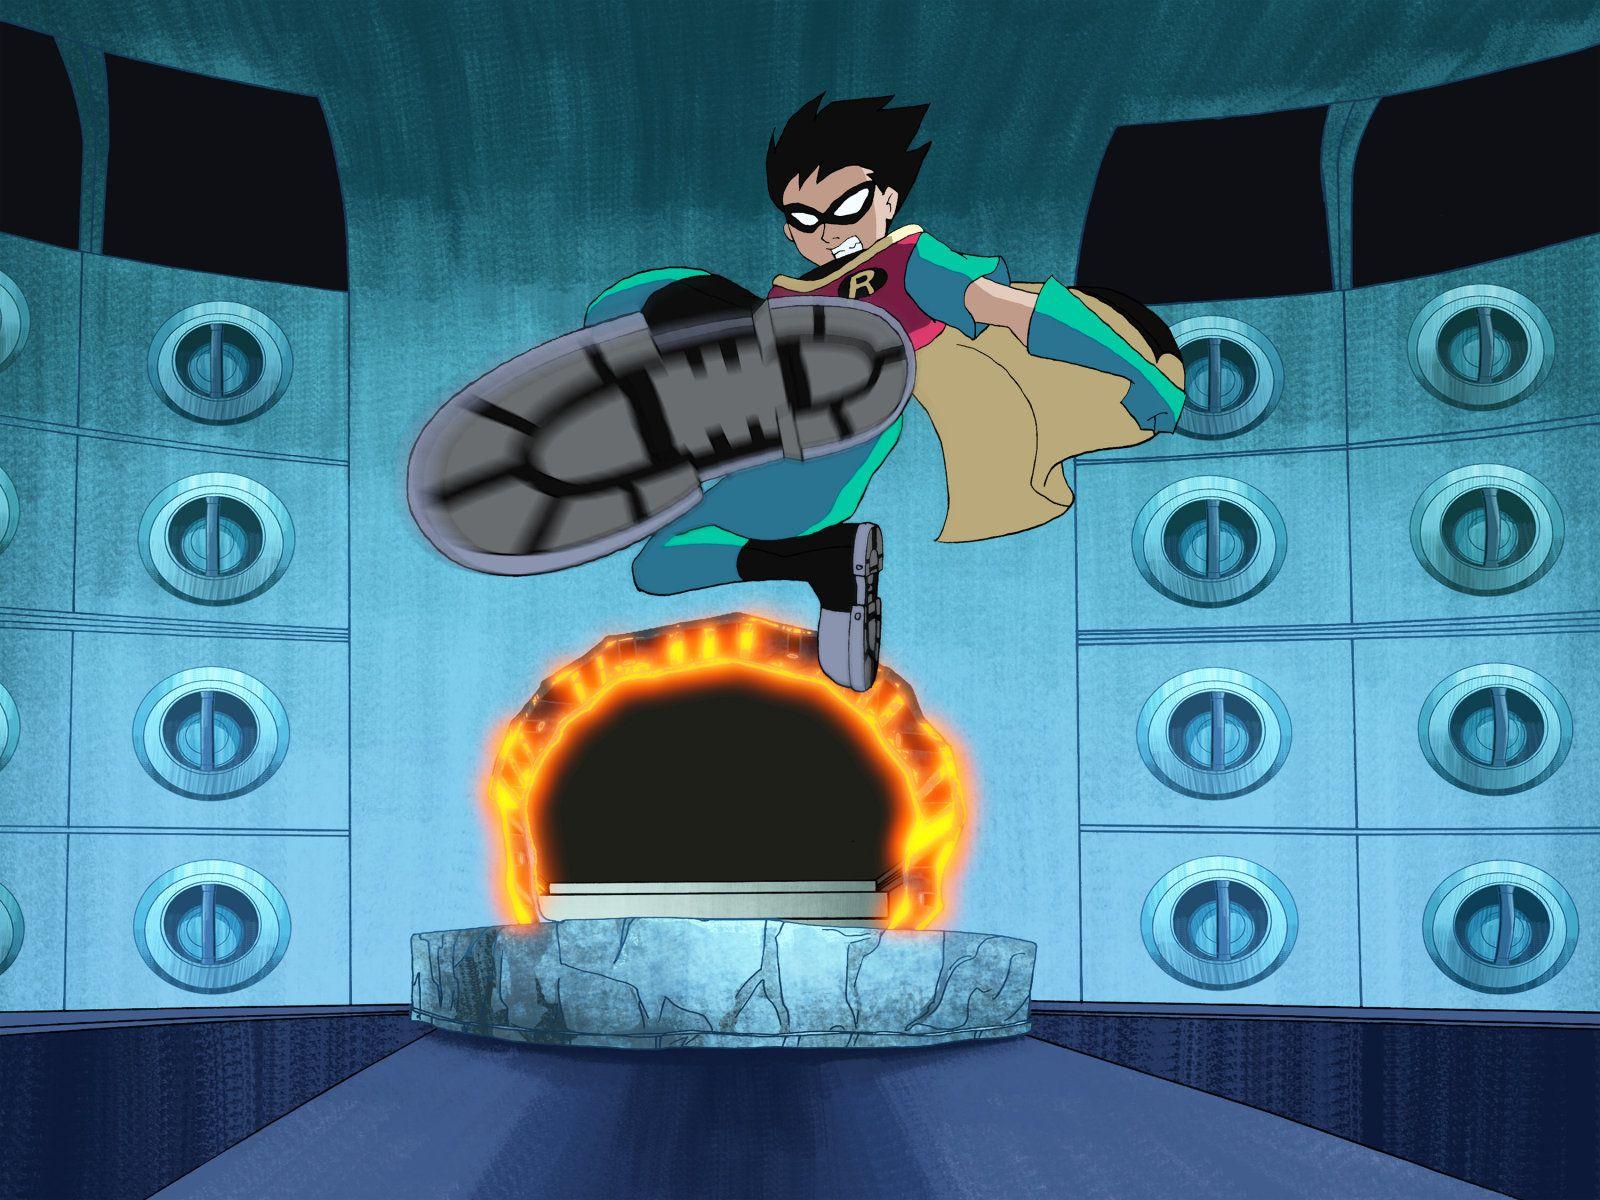 Teen Titans image Robin HD wallpaper and background photo